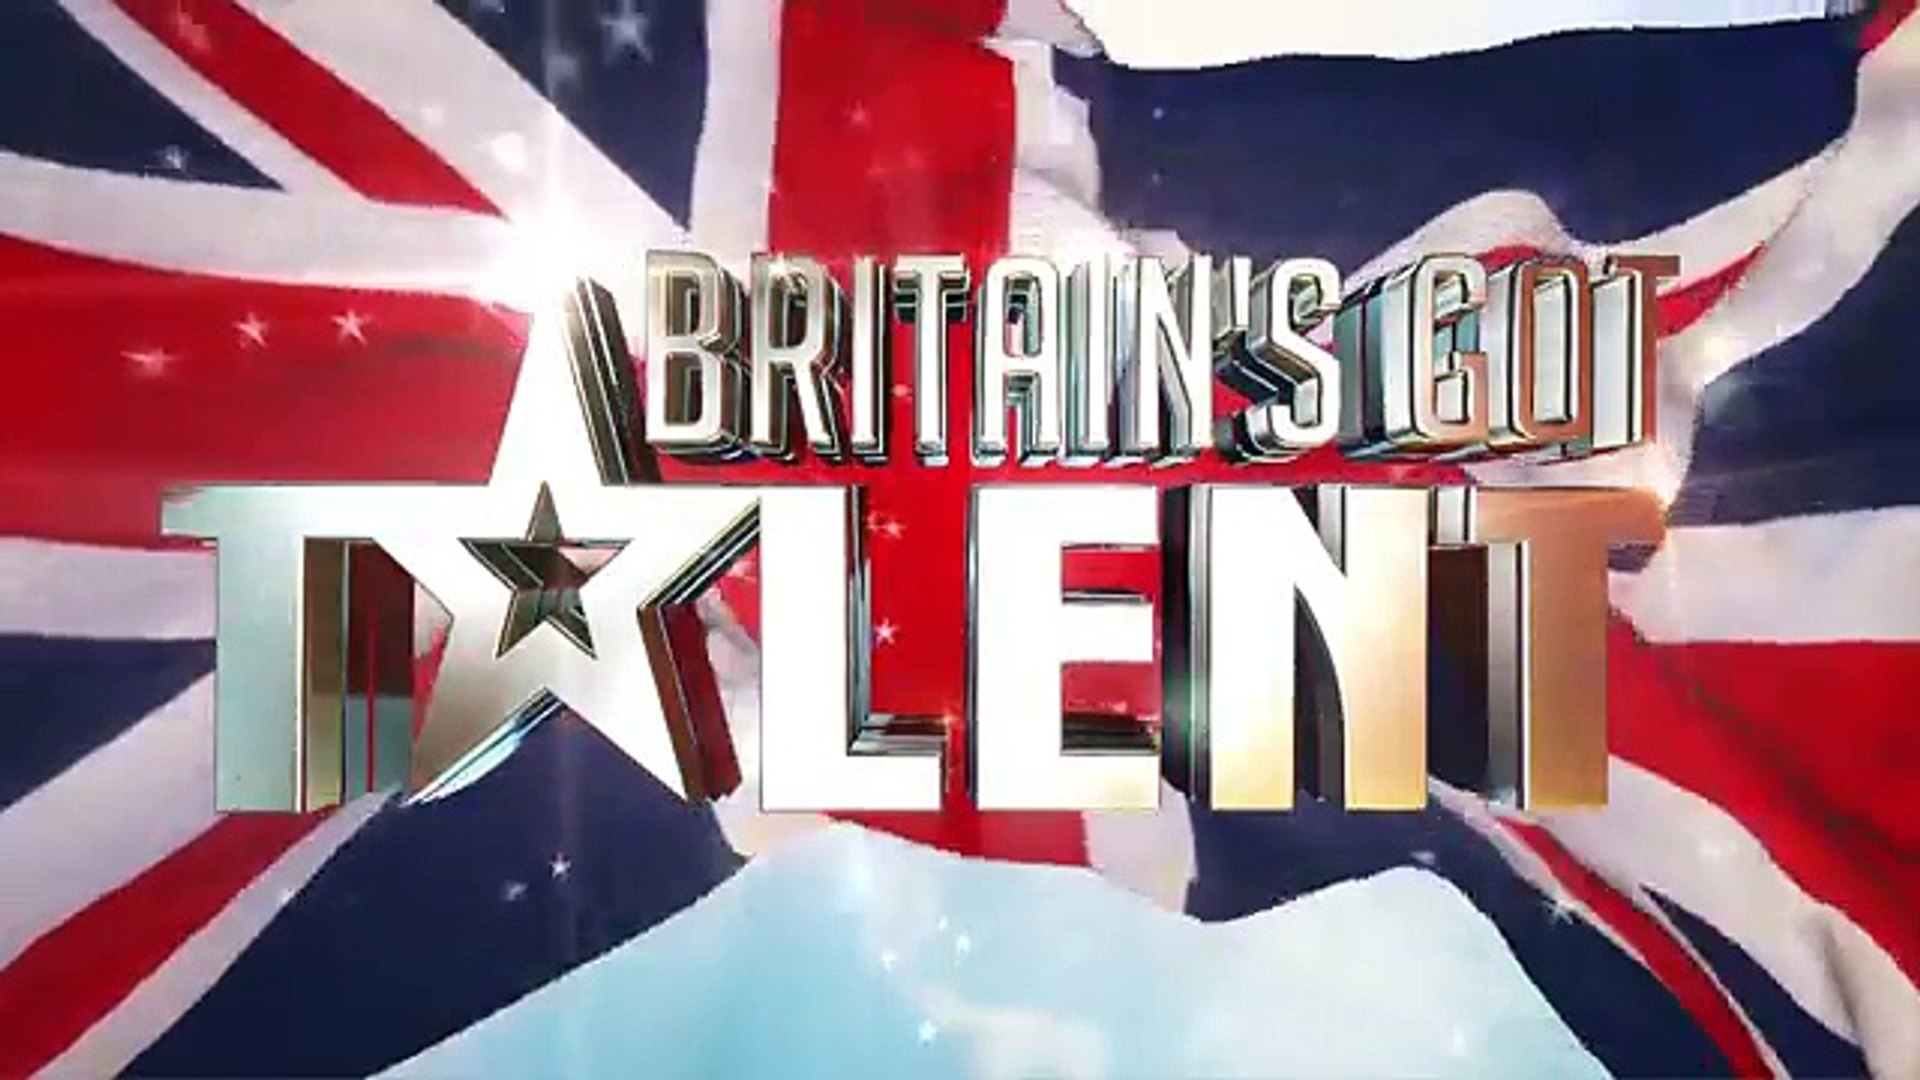 Missing People Choir touch our hearts with emotional song Grand Final Britain’s Got Talent